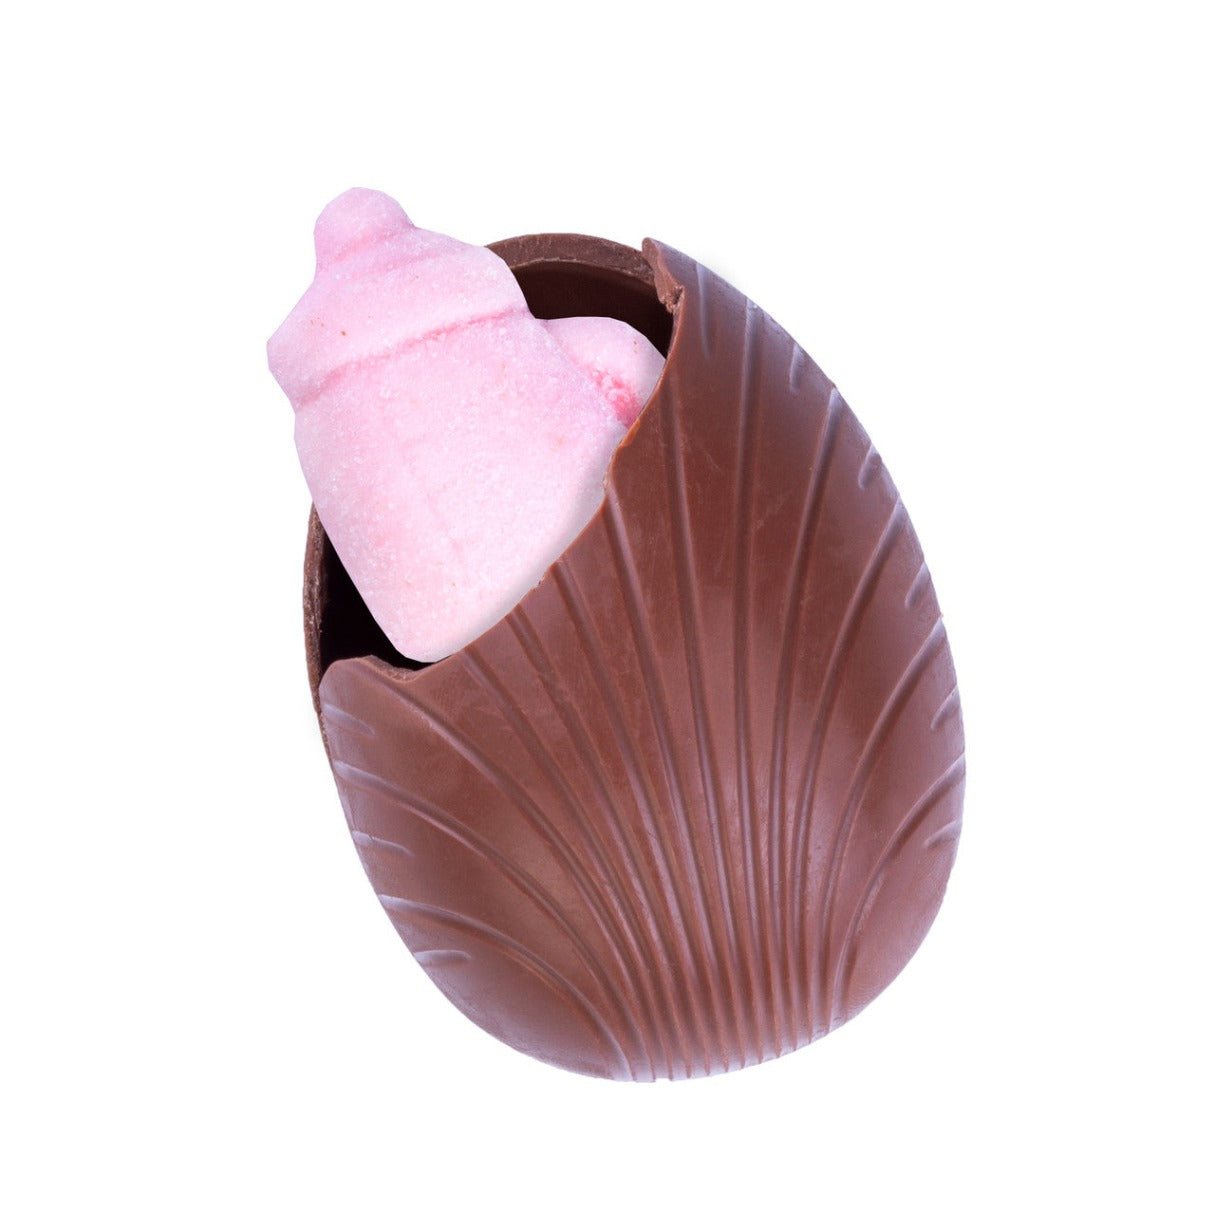 L.O.L. Surprise! Chocolate Egg with Marshmallow (Case) 2.12oz - 6ct